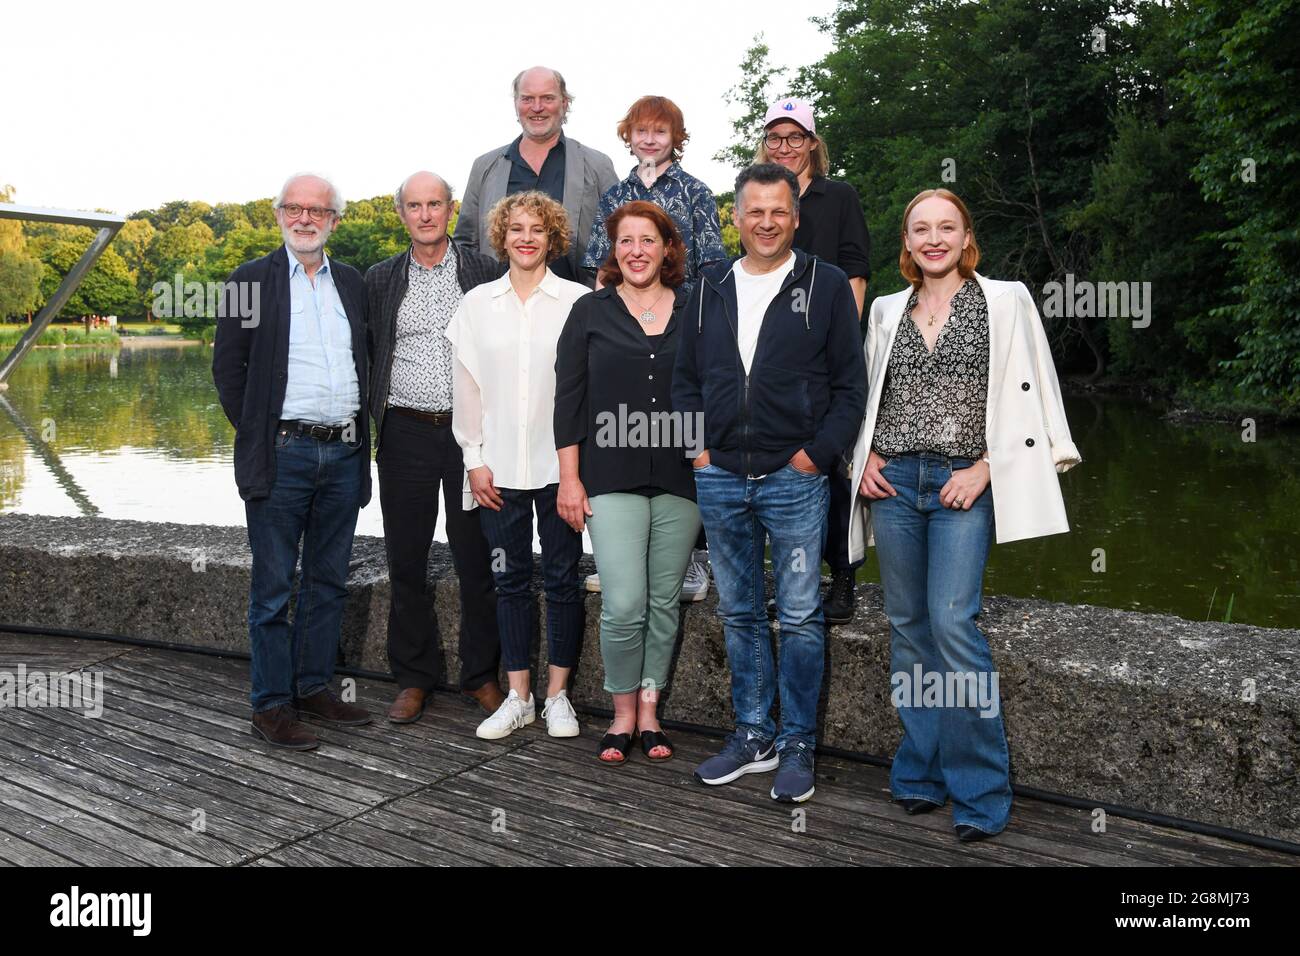 Munich, Germany. 21st July, 2021. The actors Ferdinand Dörfler (back, l-r), Xari Wimbauer, Katja Bürkle, as well as Ulrich Limmer (front, l-r), producer, and the actors Johannes Herrschmann, Silja Bächli, Luise Kinseher, Gerhard Wittmann and Brigitte Hobmeier, taken at a photo session before the screening of the film 'Weißbier im Blut' at the open-air cinema 'Kino Mond & Sterne' in the Westpark. Credit: Tobias Hase/dpa/Alamy Live News Stock Photo